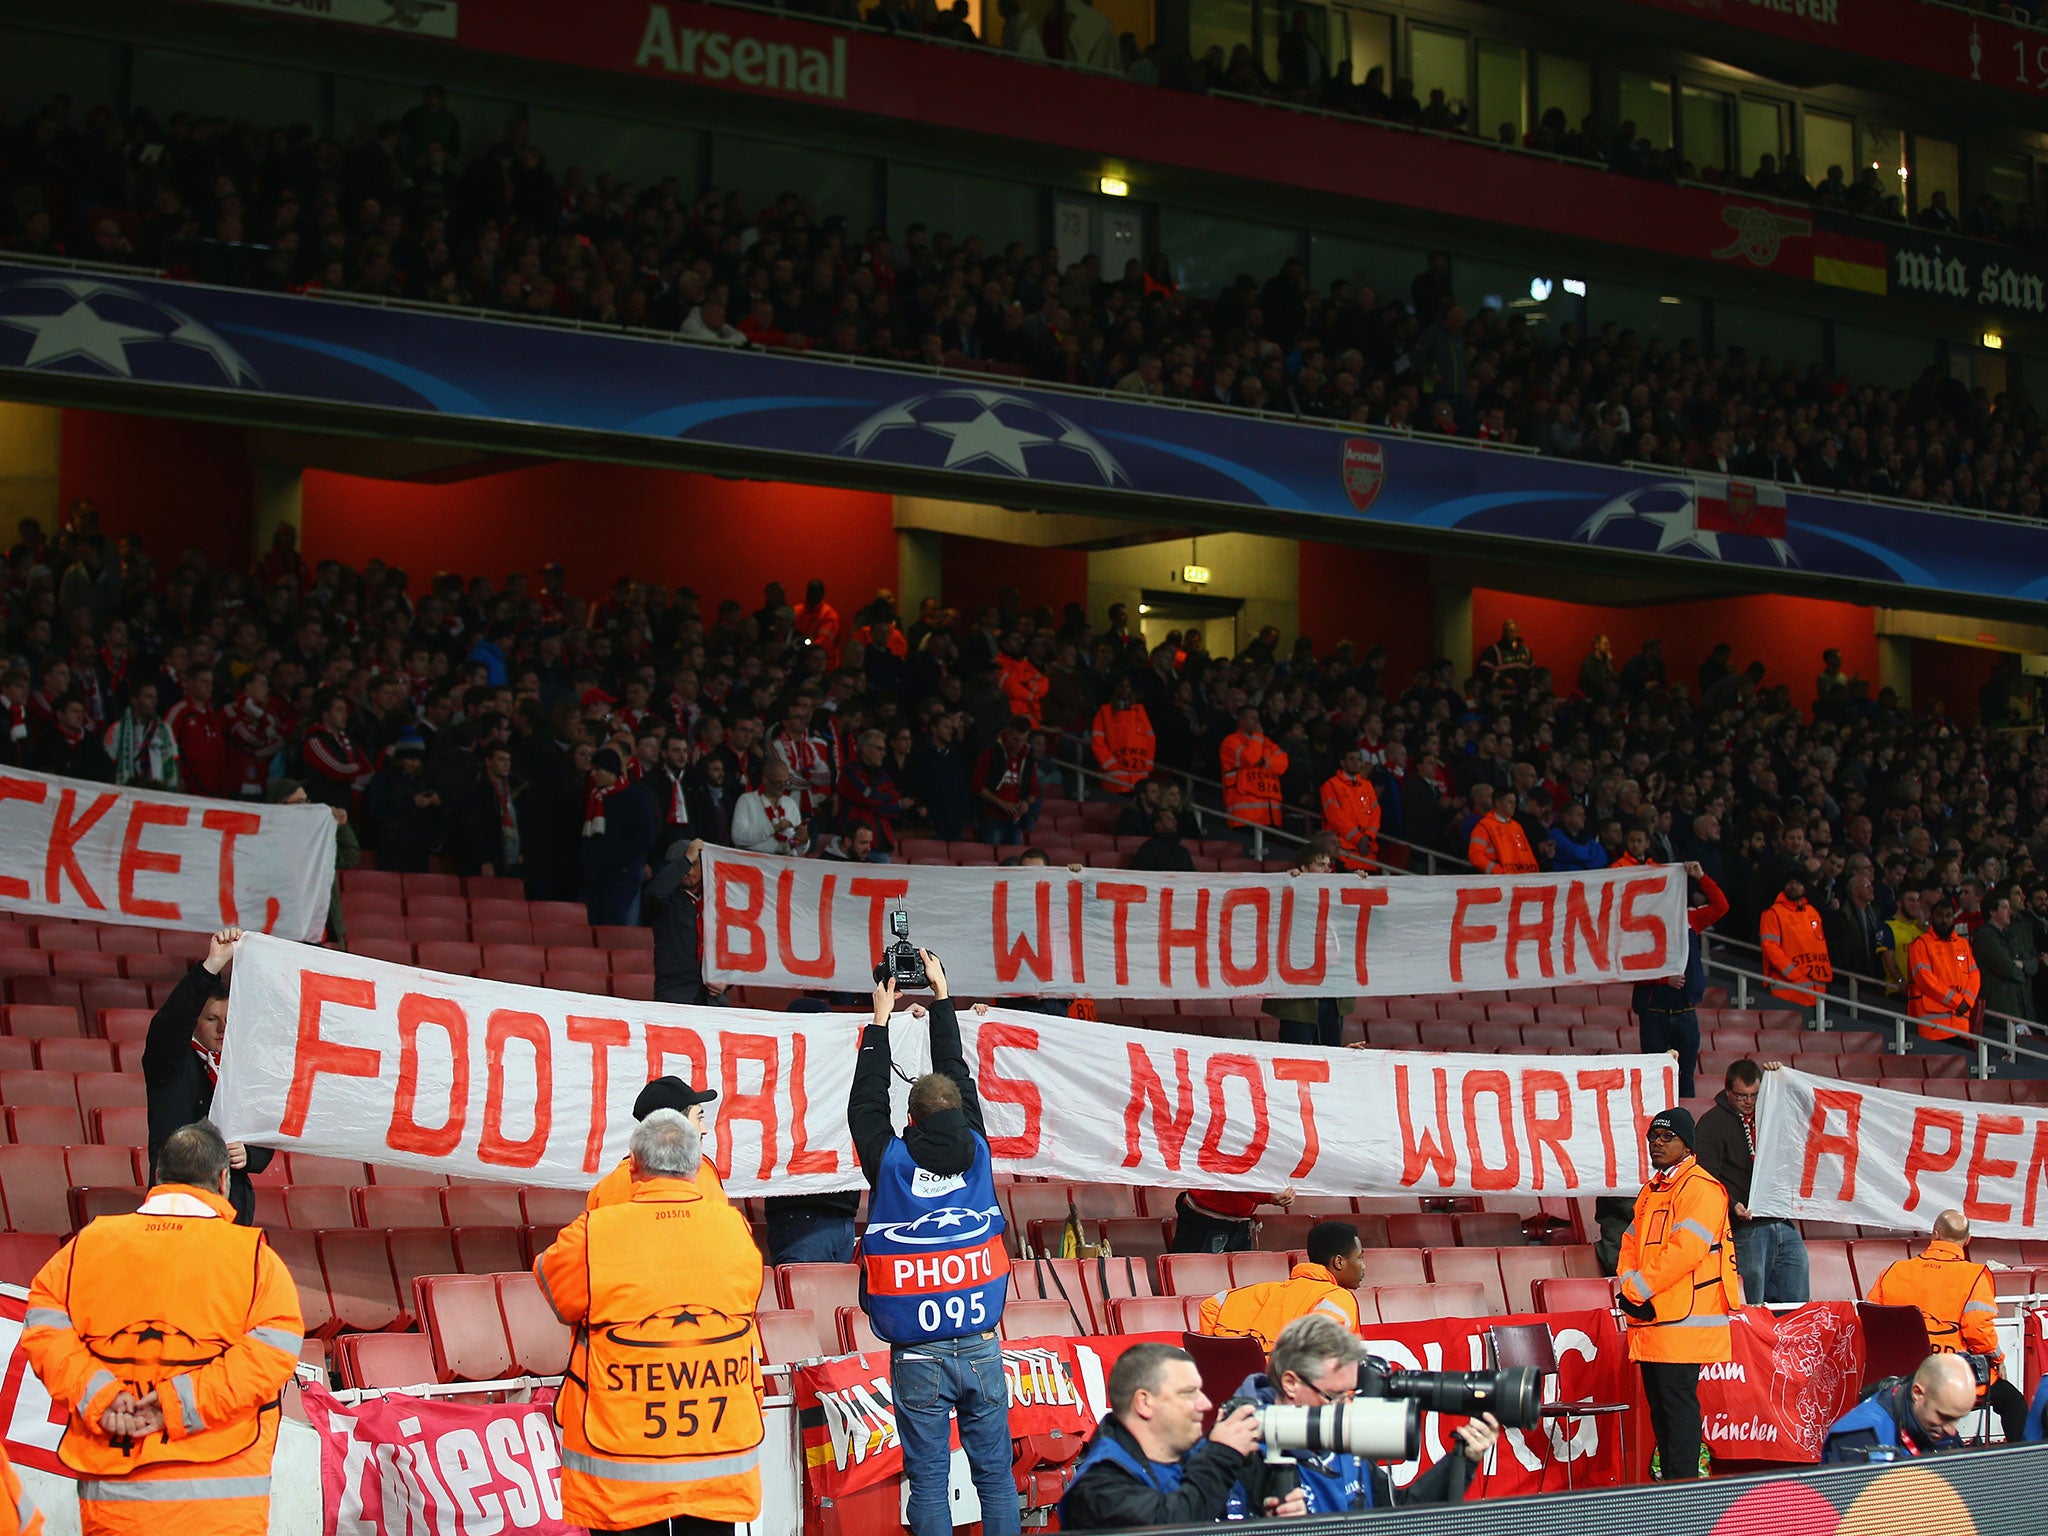 Bayern Munich fans protest over ticket prices at Arsenal